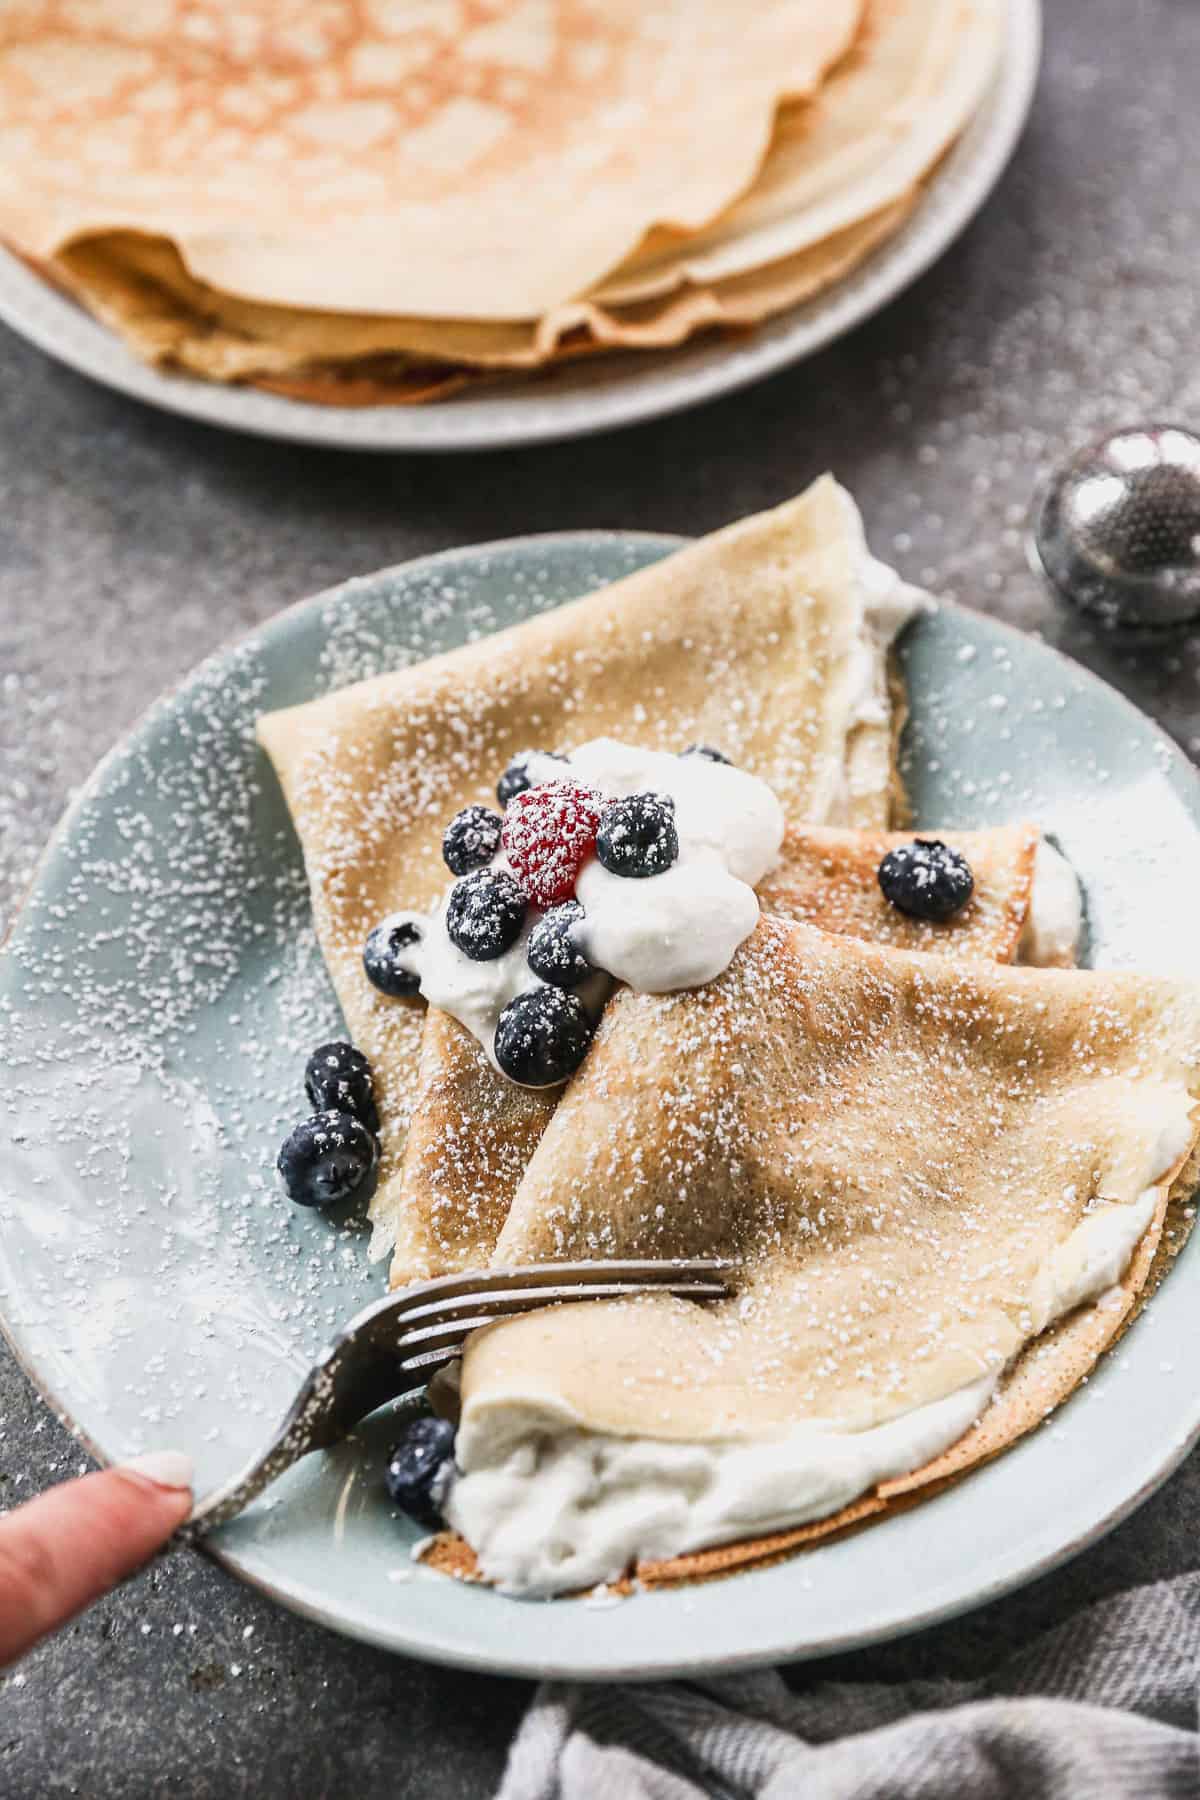 Three perfect crepes on a plate with whipped cream and berries, with a fork cutting a bite.